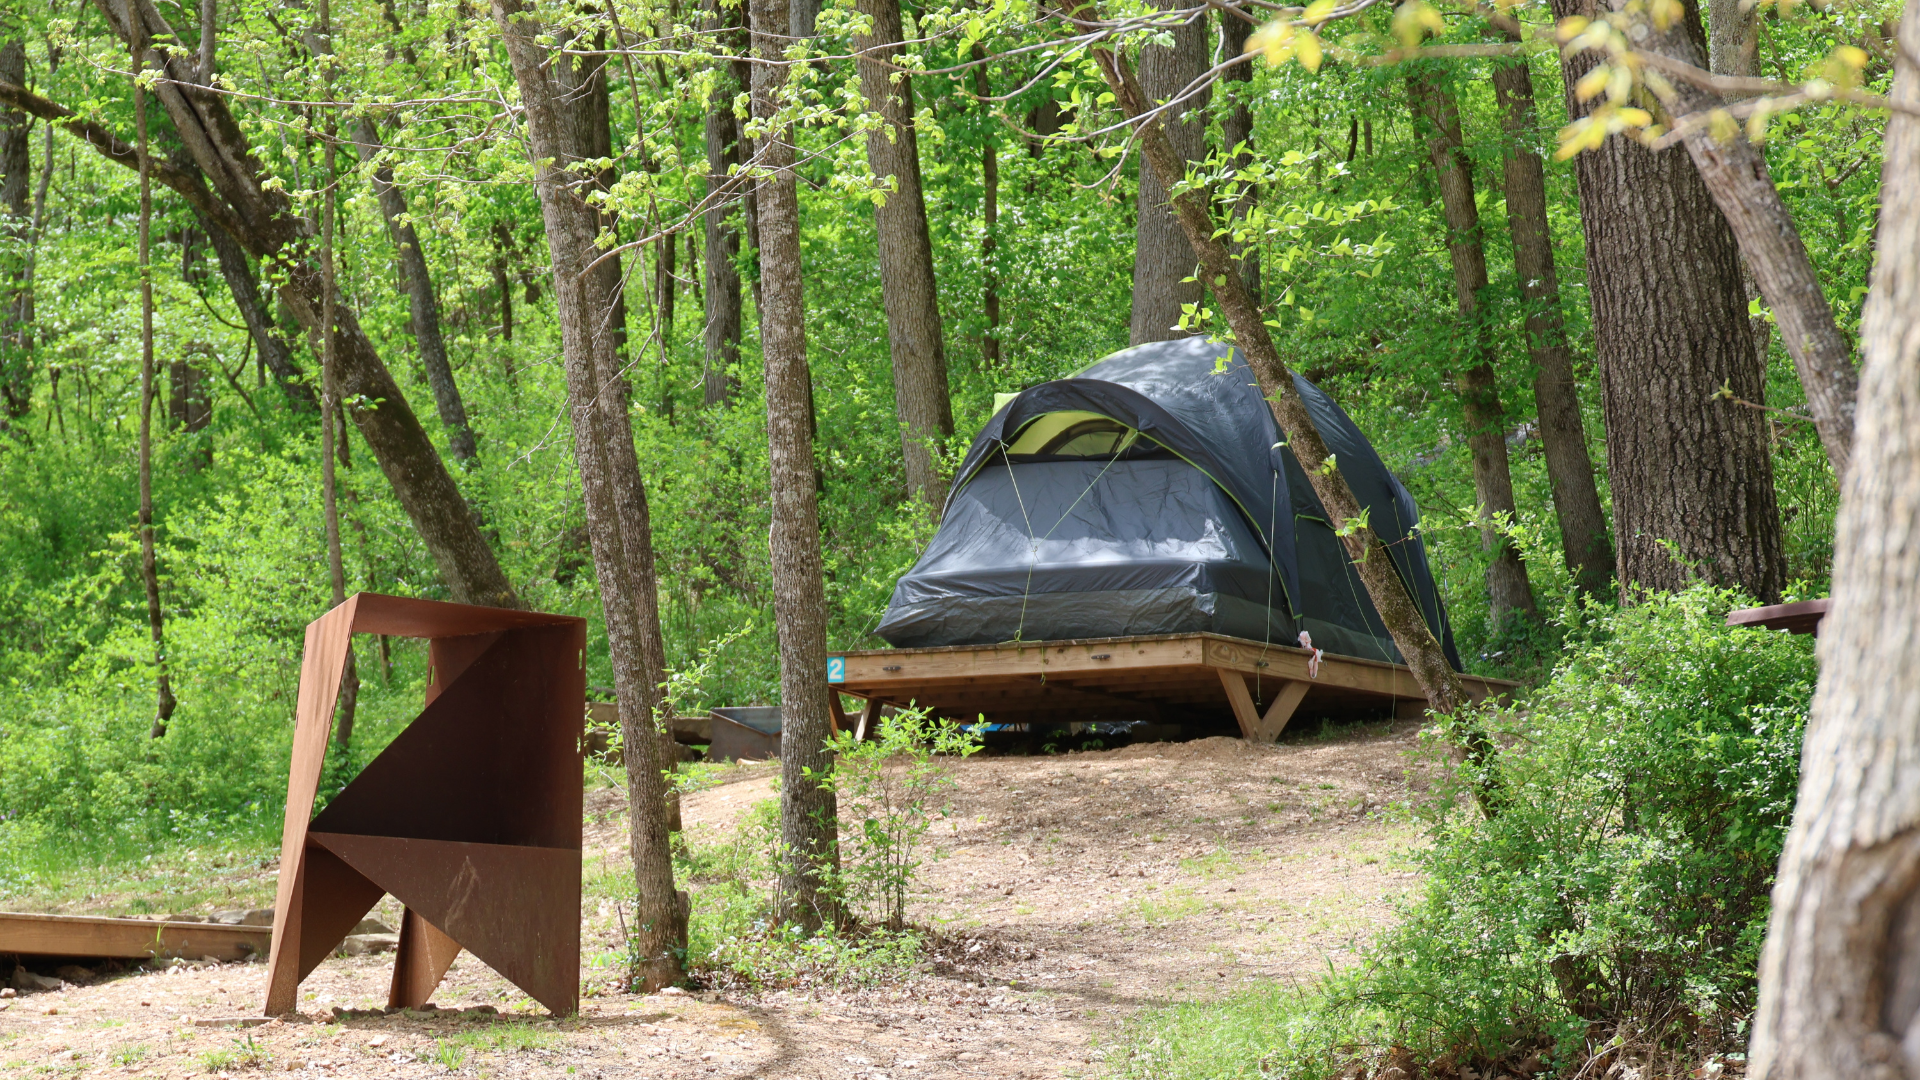 Blue camping tent in the woods surrounded by green trees and shrubs